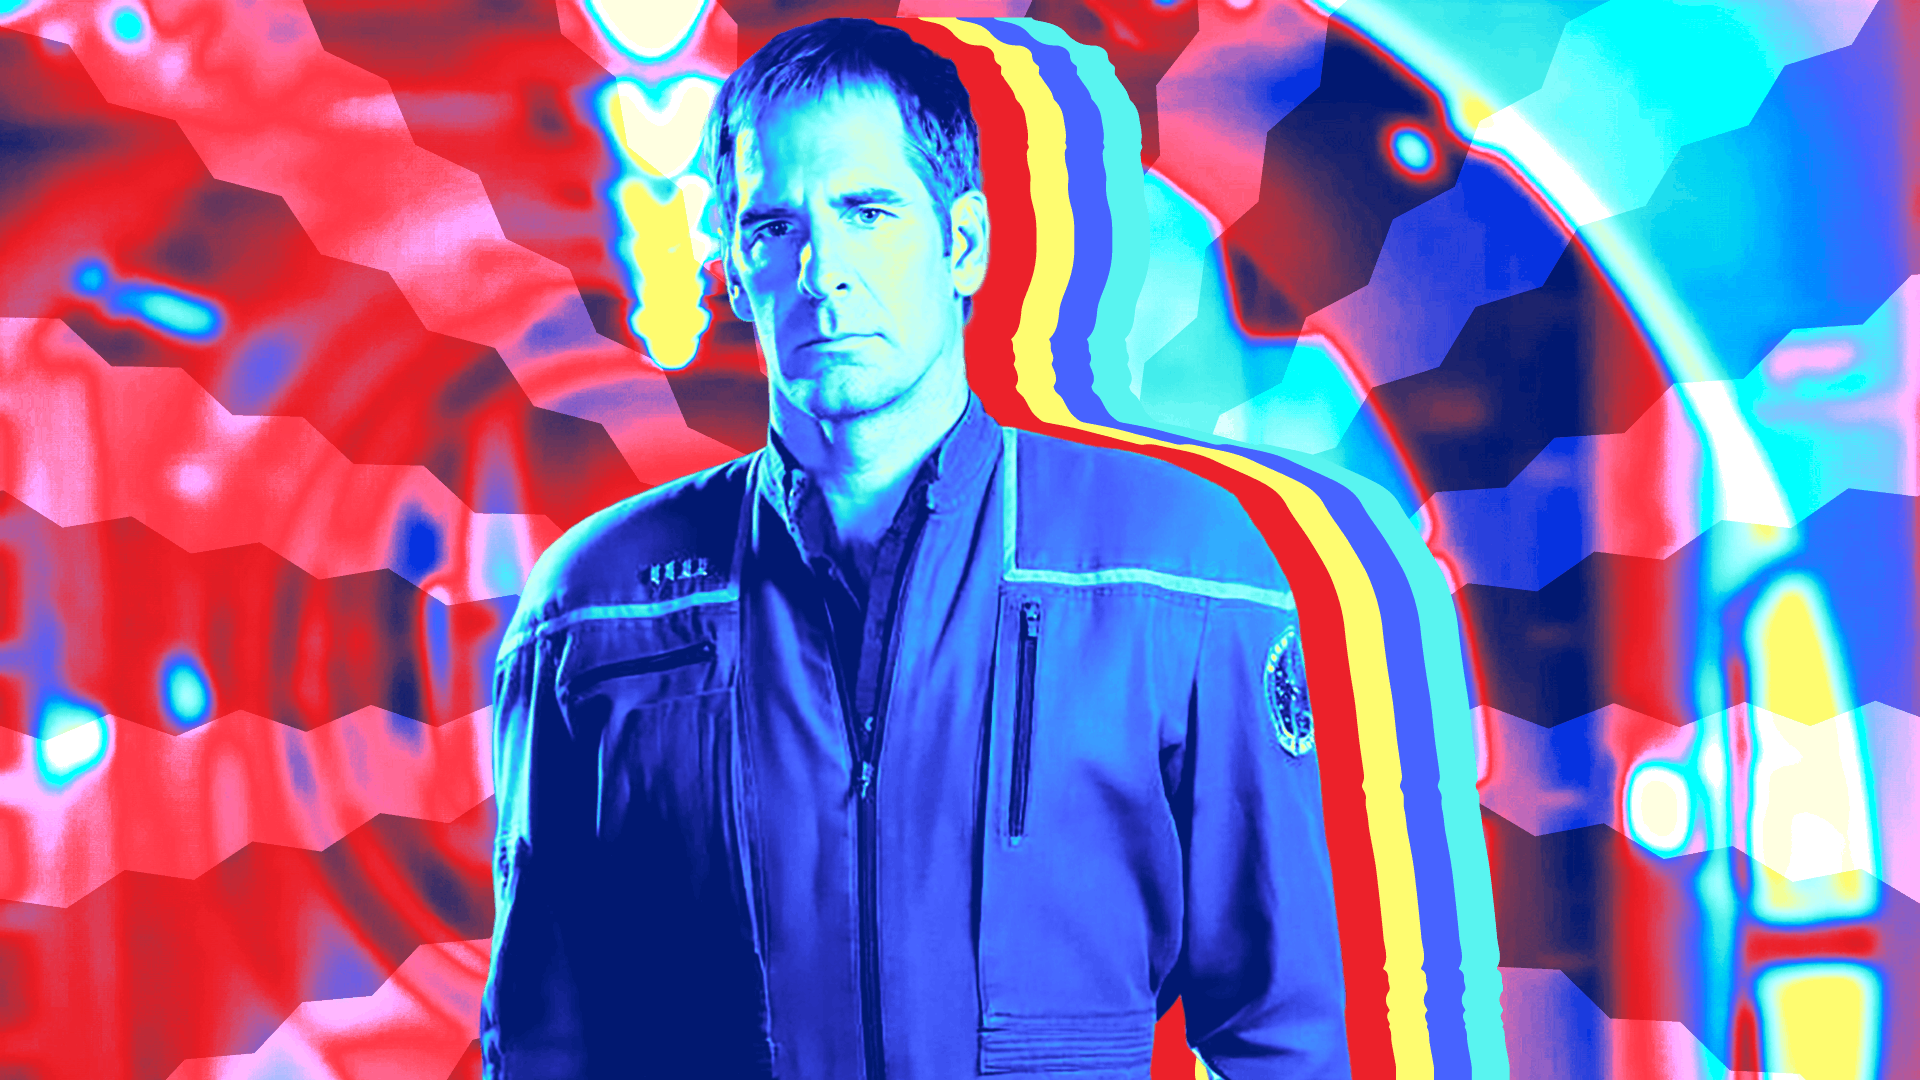 Stylized and filtered image of Captain Jonathan Archer